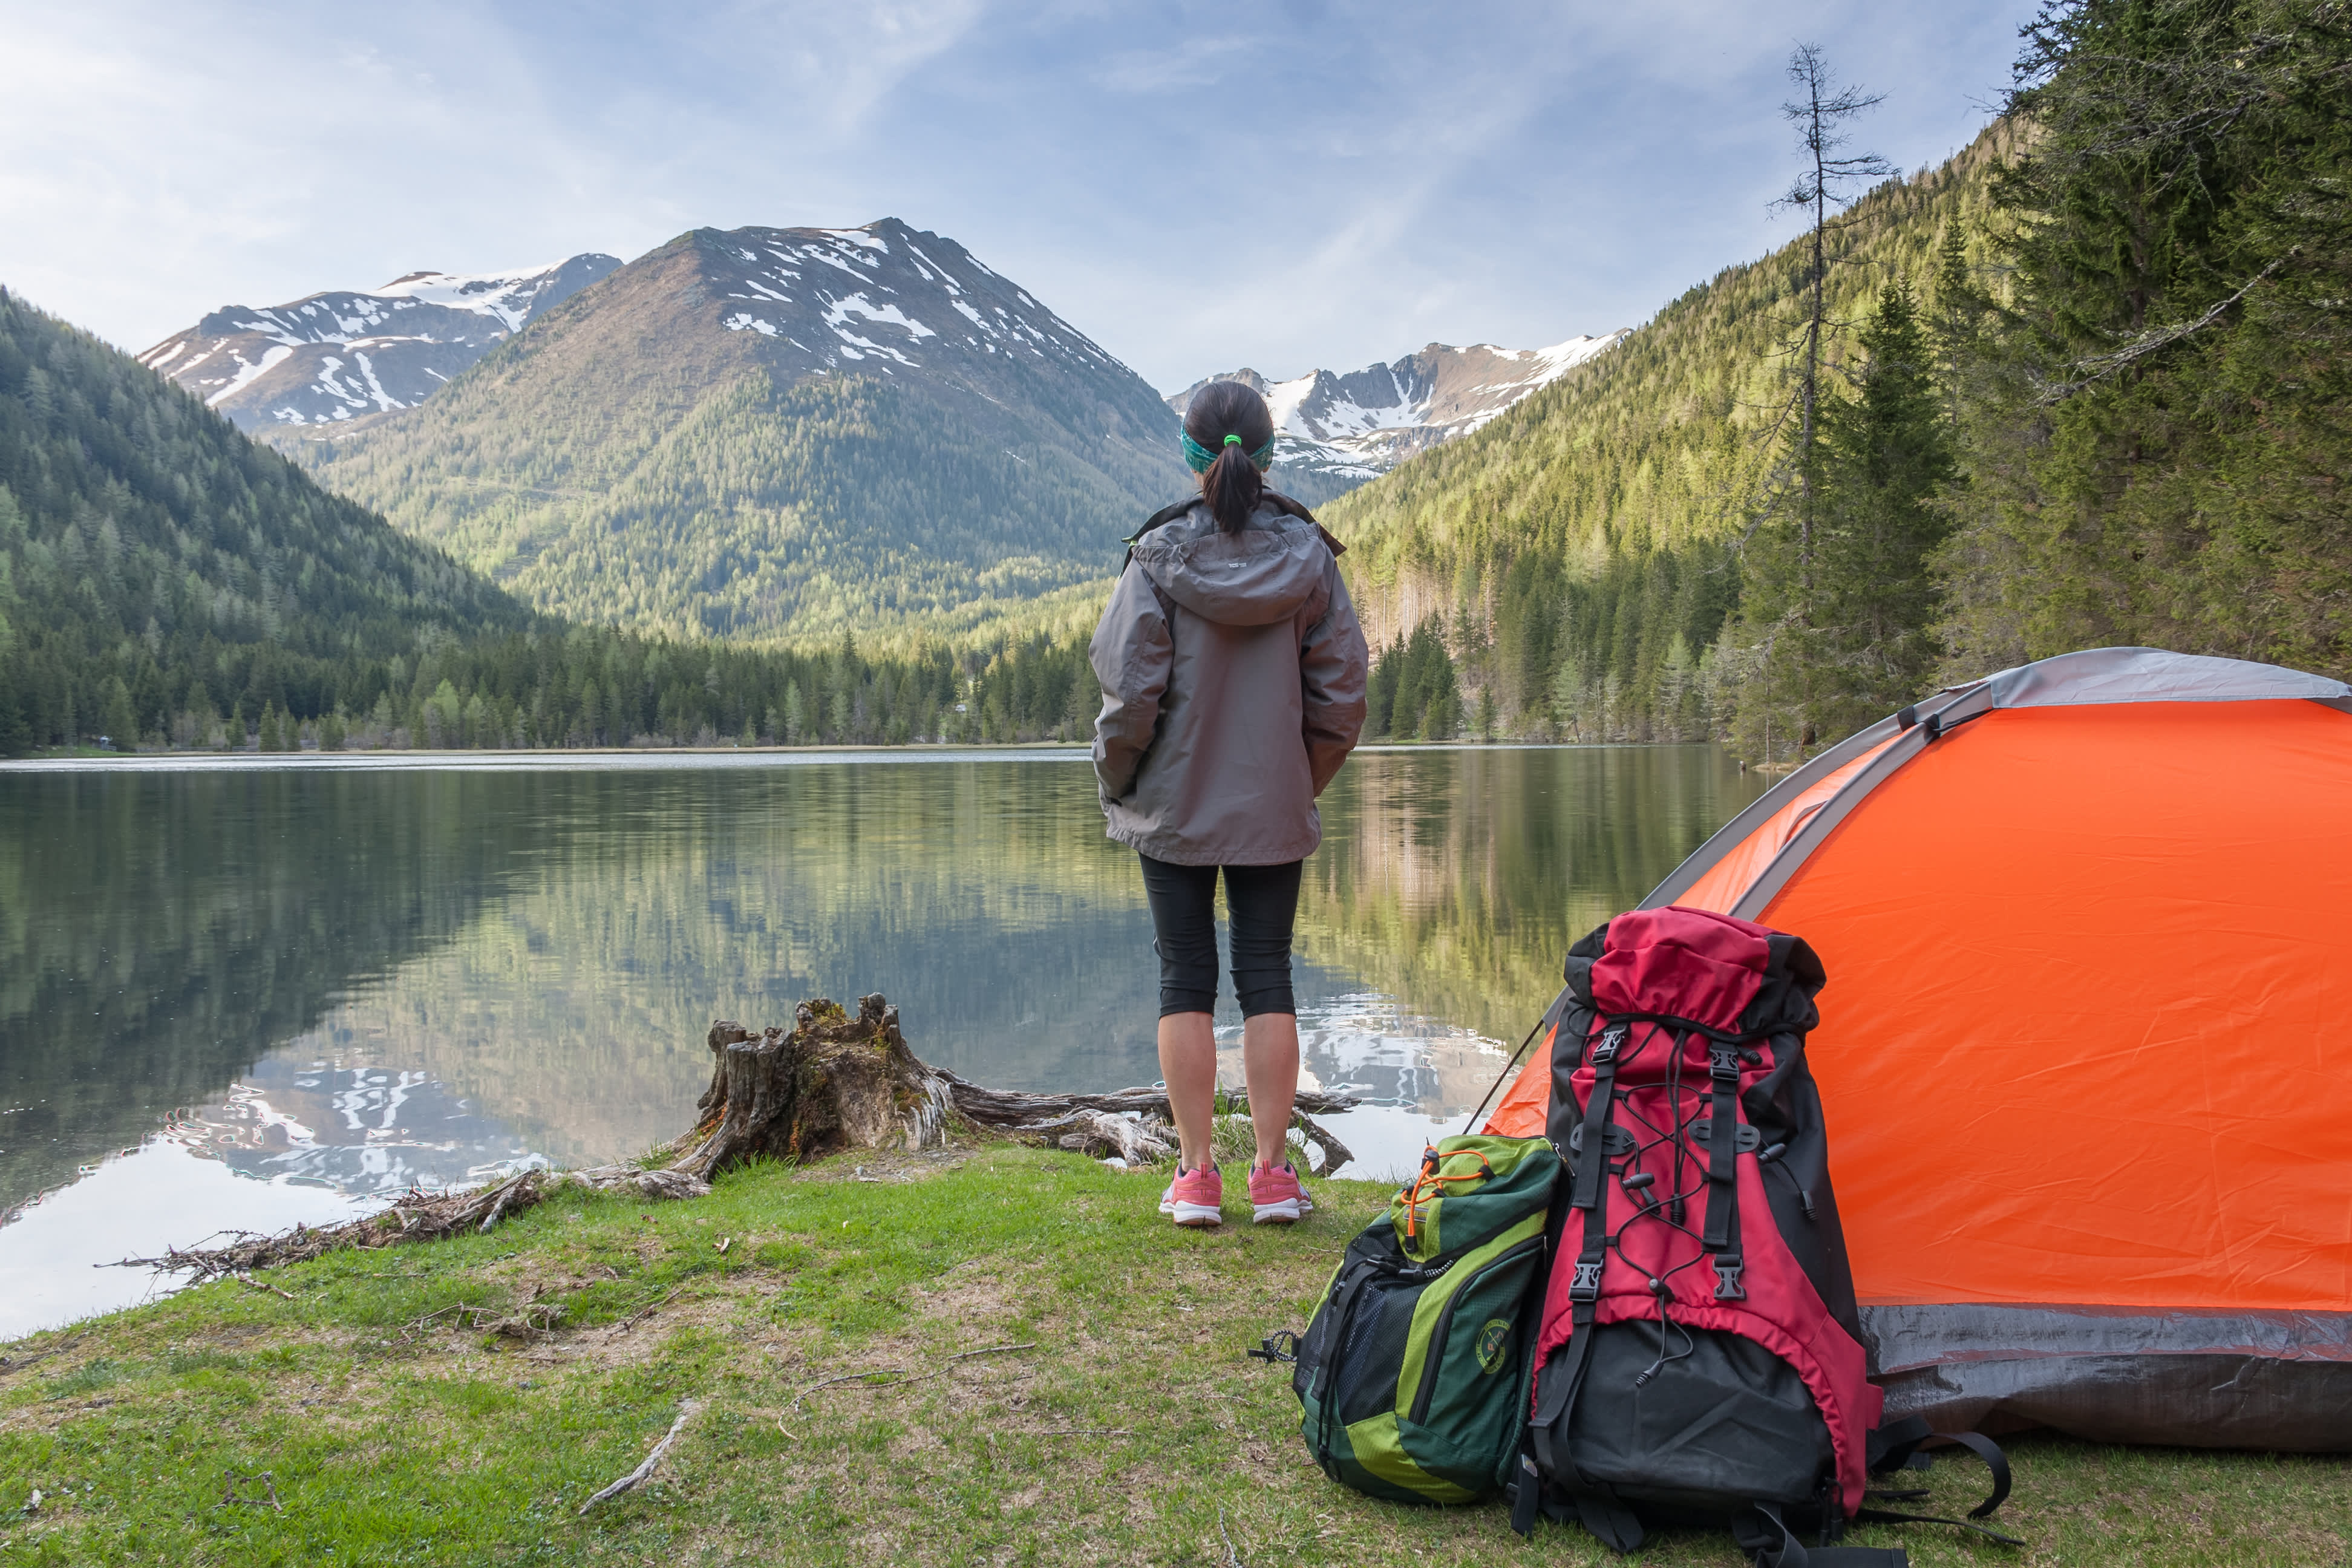 6 Sites Where You Can Buy and Sell Used Camping Gear